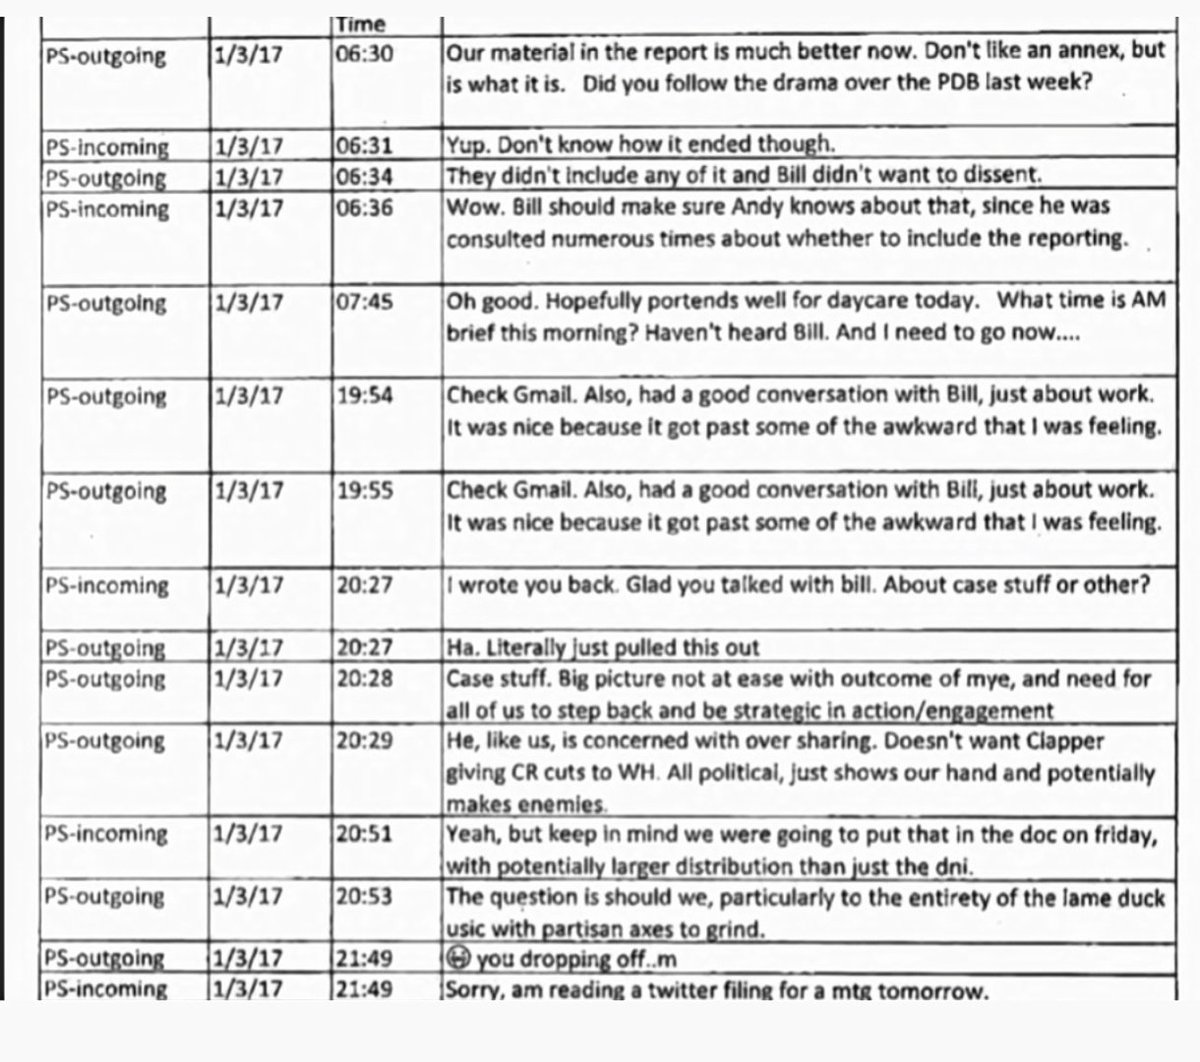 14. Strzok texts Page twice the exact same message about checking her Gmail in the span of a minute. We know that they used Gmail to communicate, and did so regarding work-related stuff.